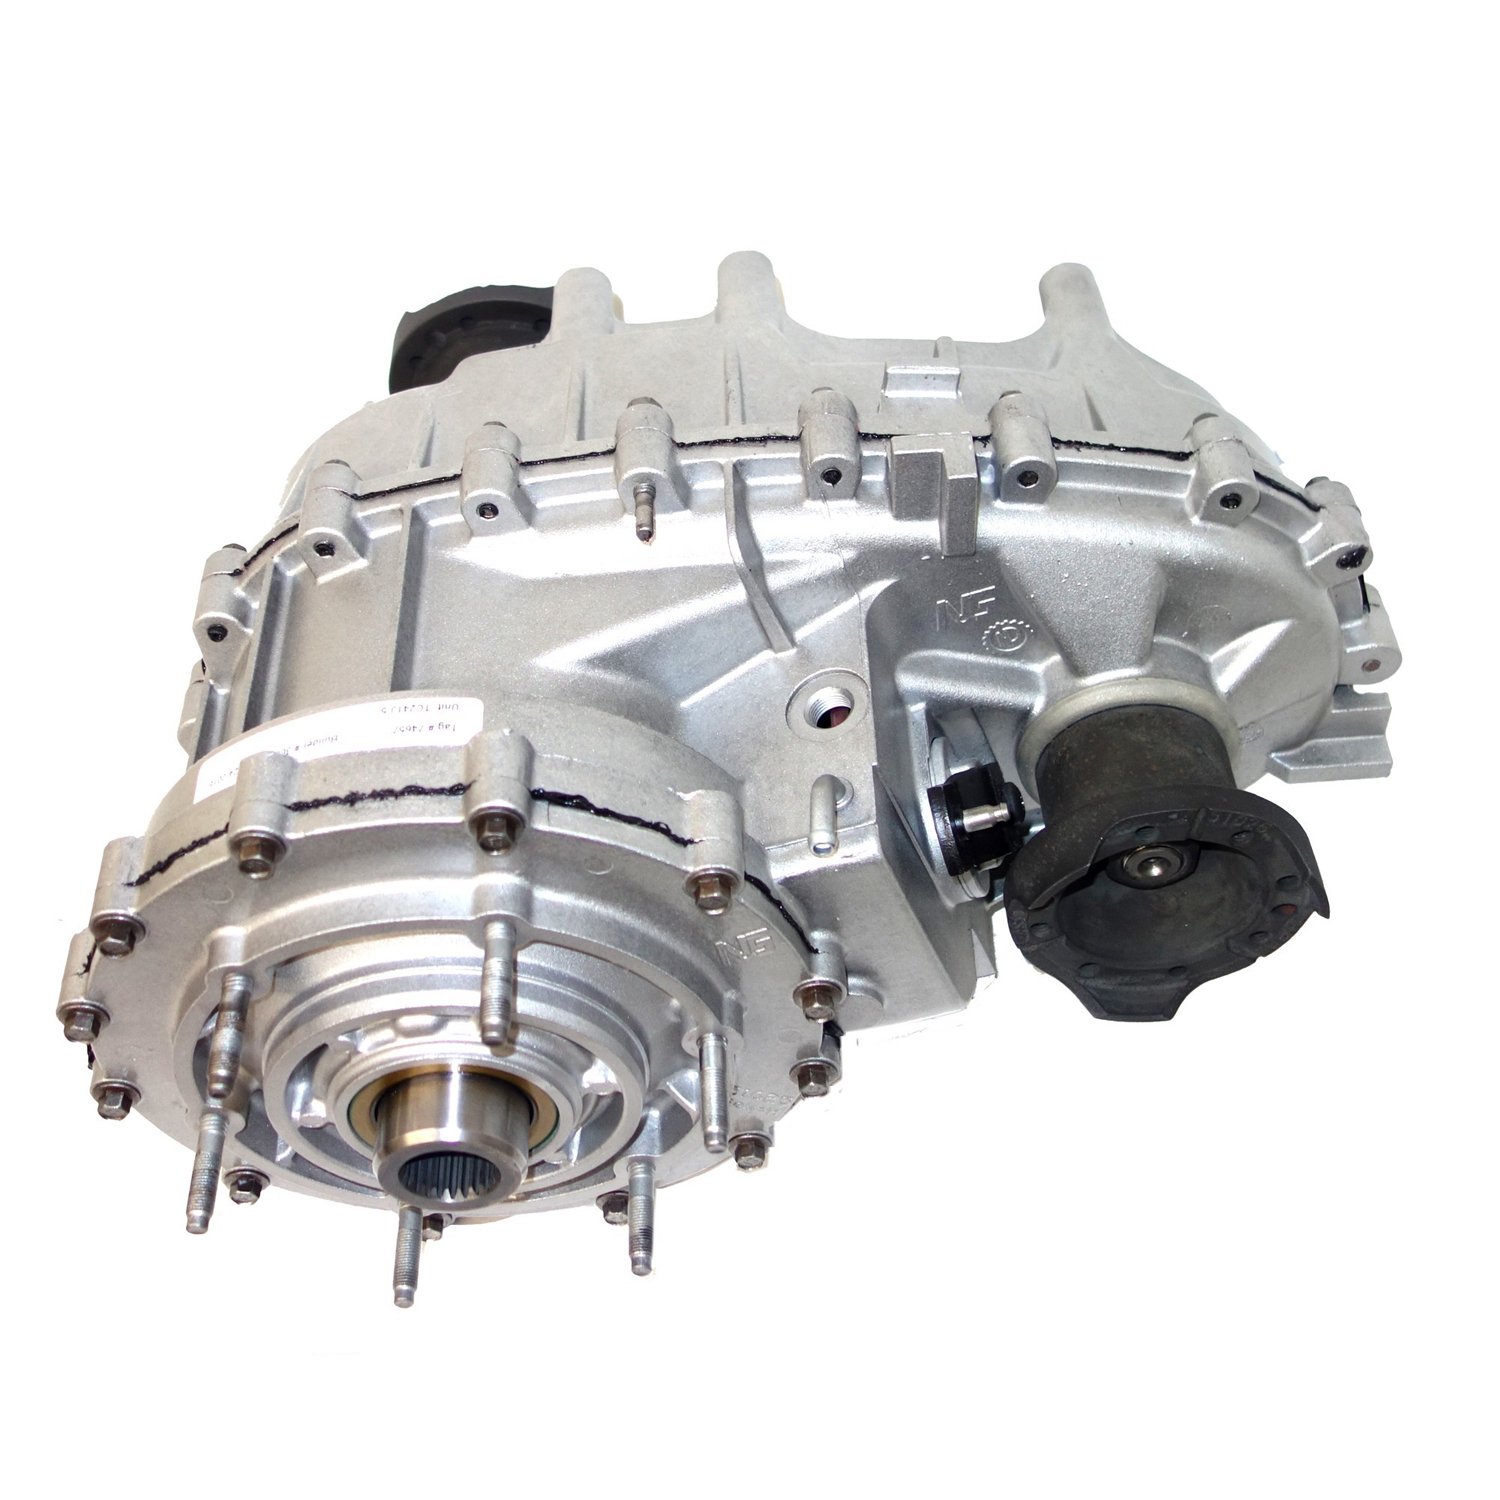 Remanufactured NP241 Transfer Case for Jeep 07-11 Wrangler